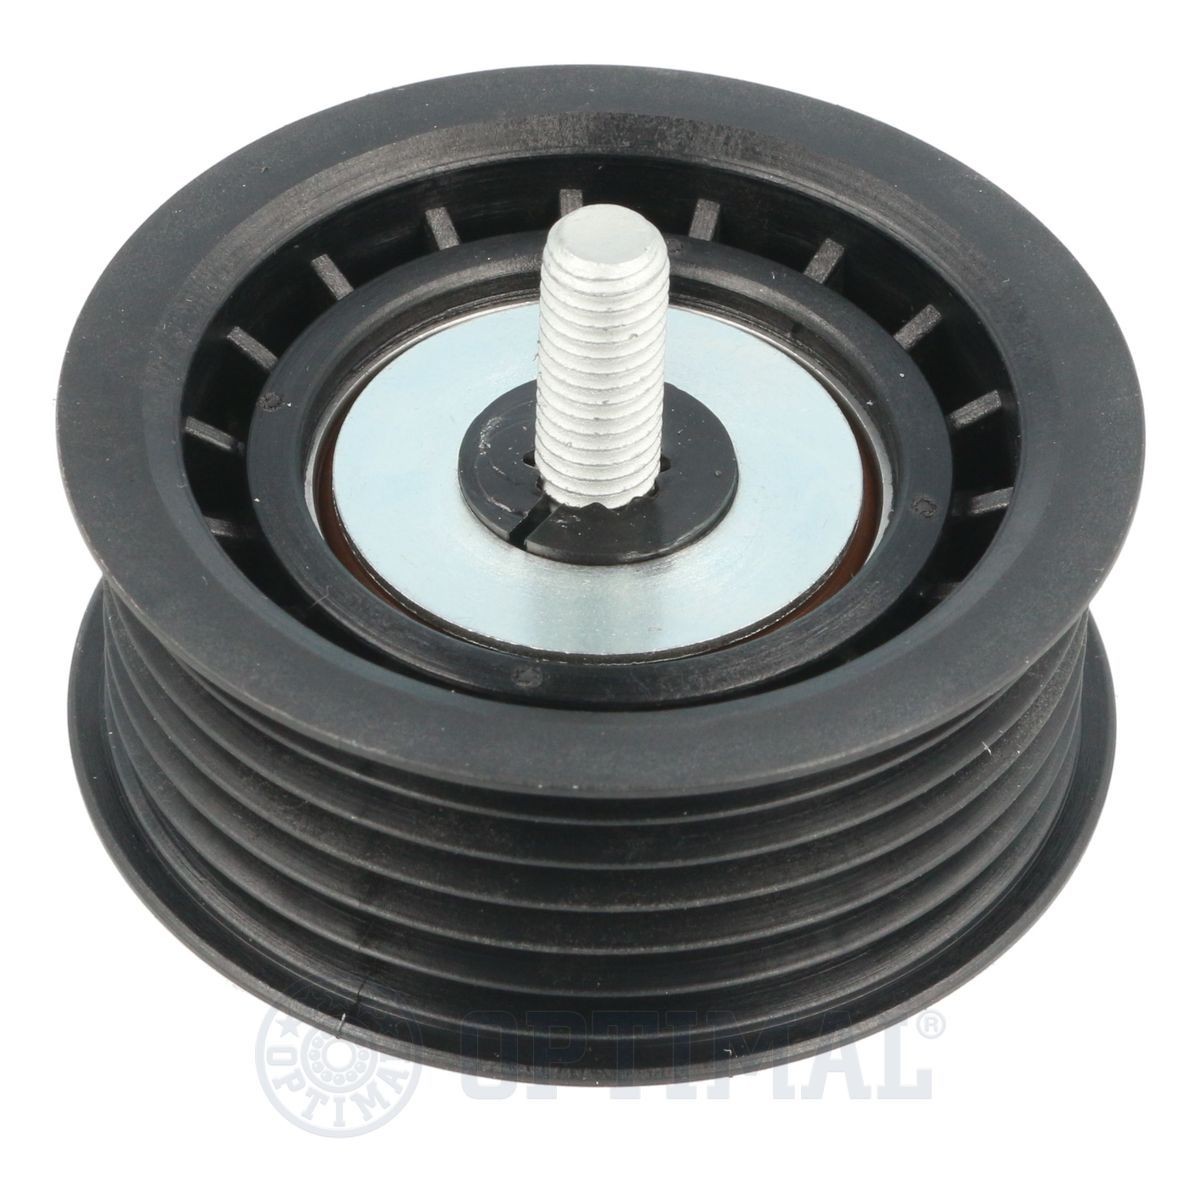 OPTIMAL 0N1637 Deflection / guide pulley, v-ribbed belt W212 E 500 5.5 4-matic 388 hp Petrol 2011 price